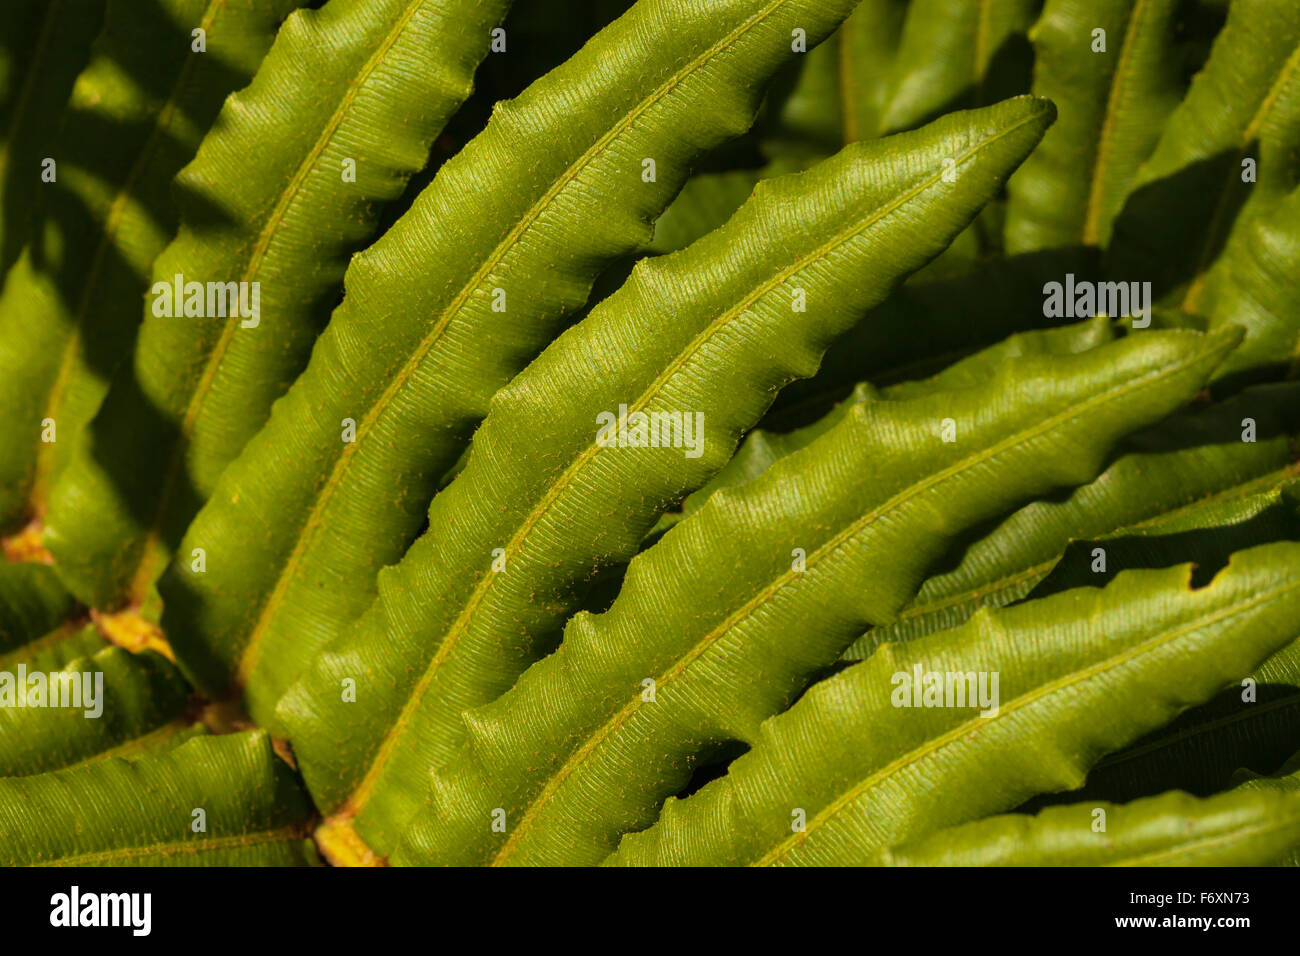 Plant with bipinnate leaves Stock Photo